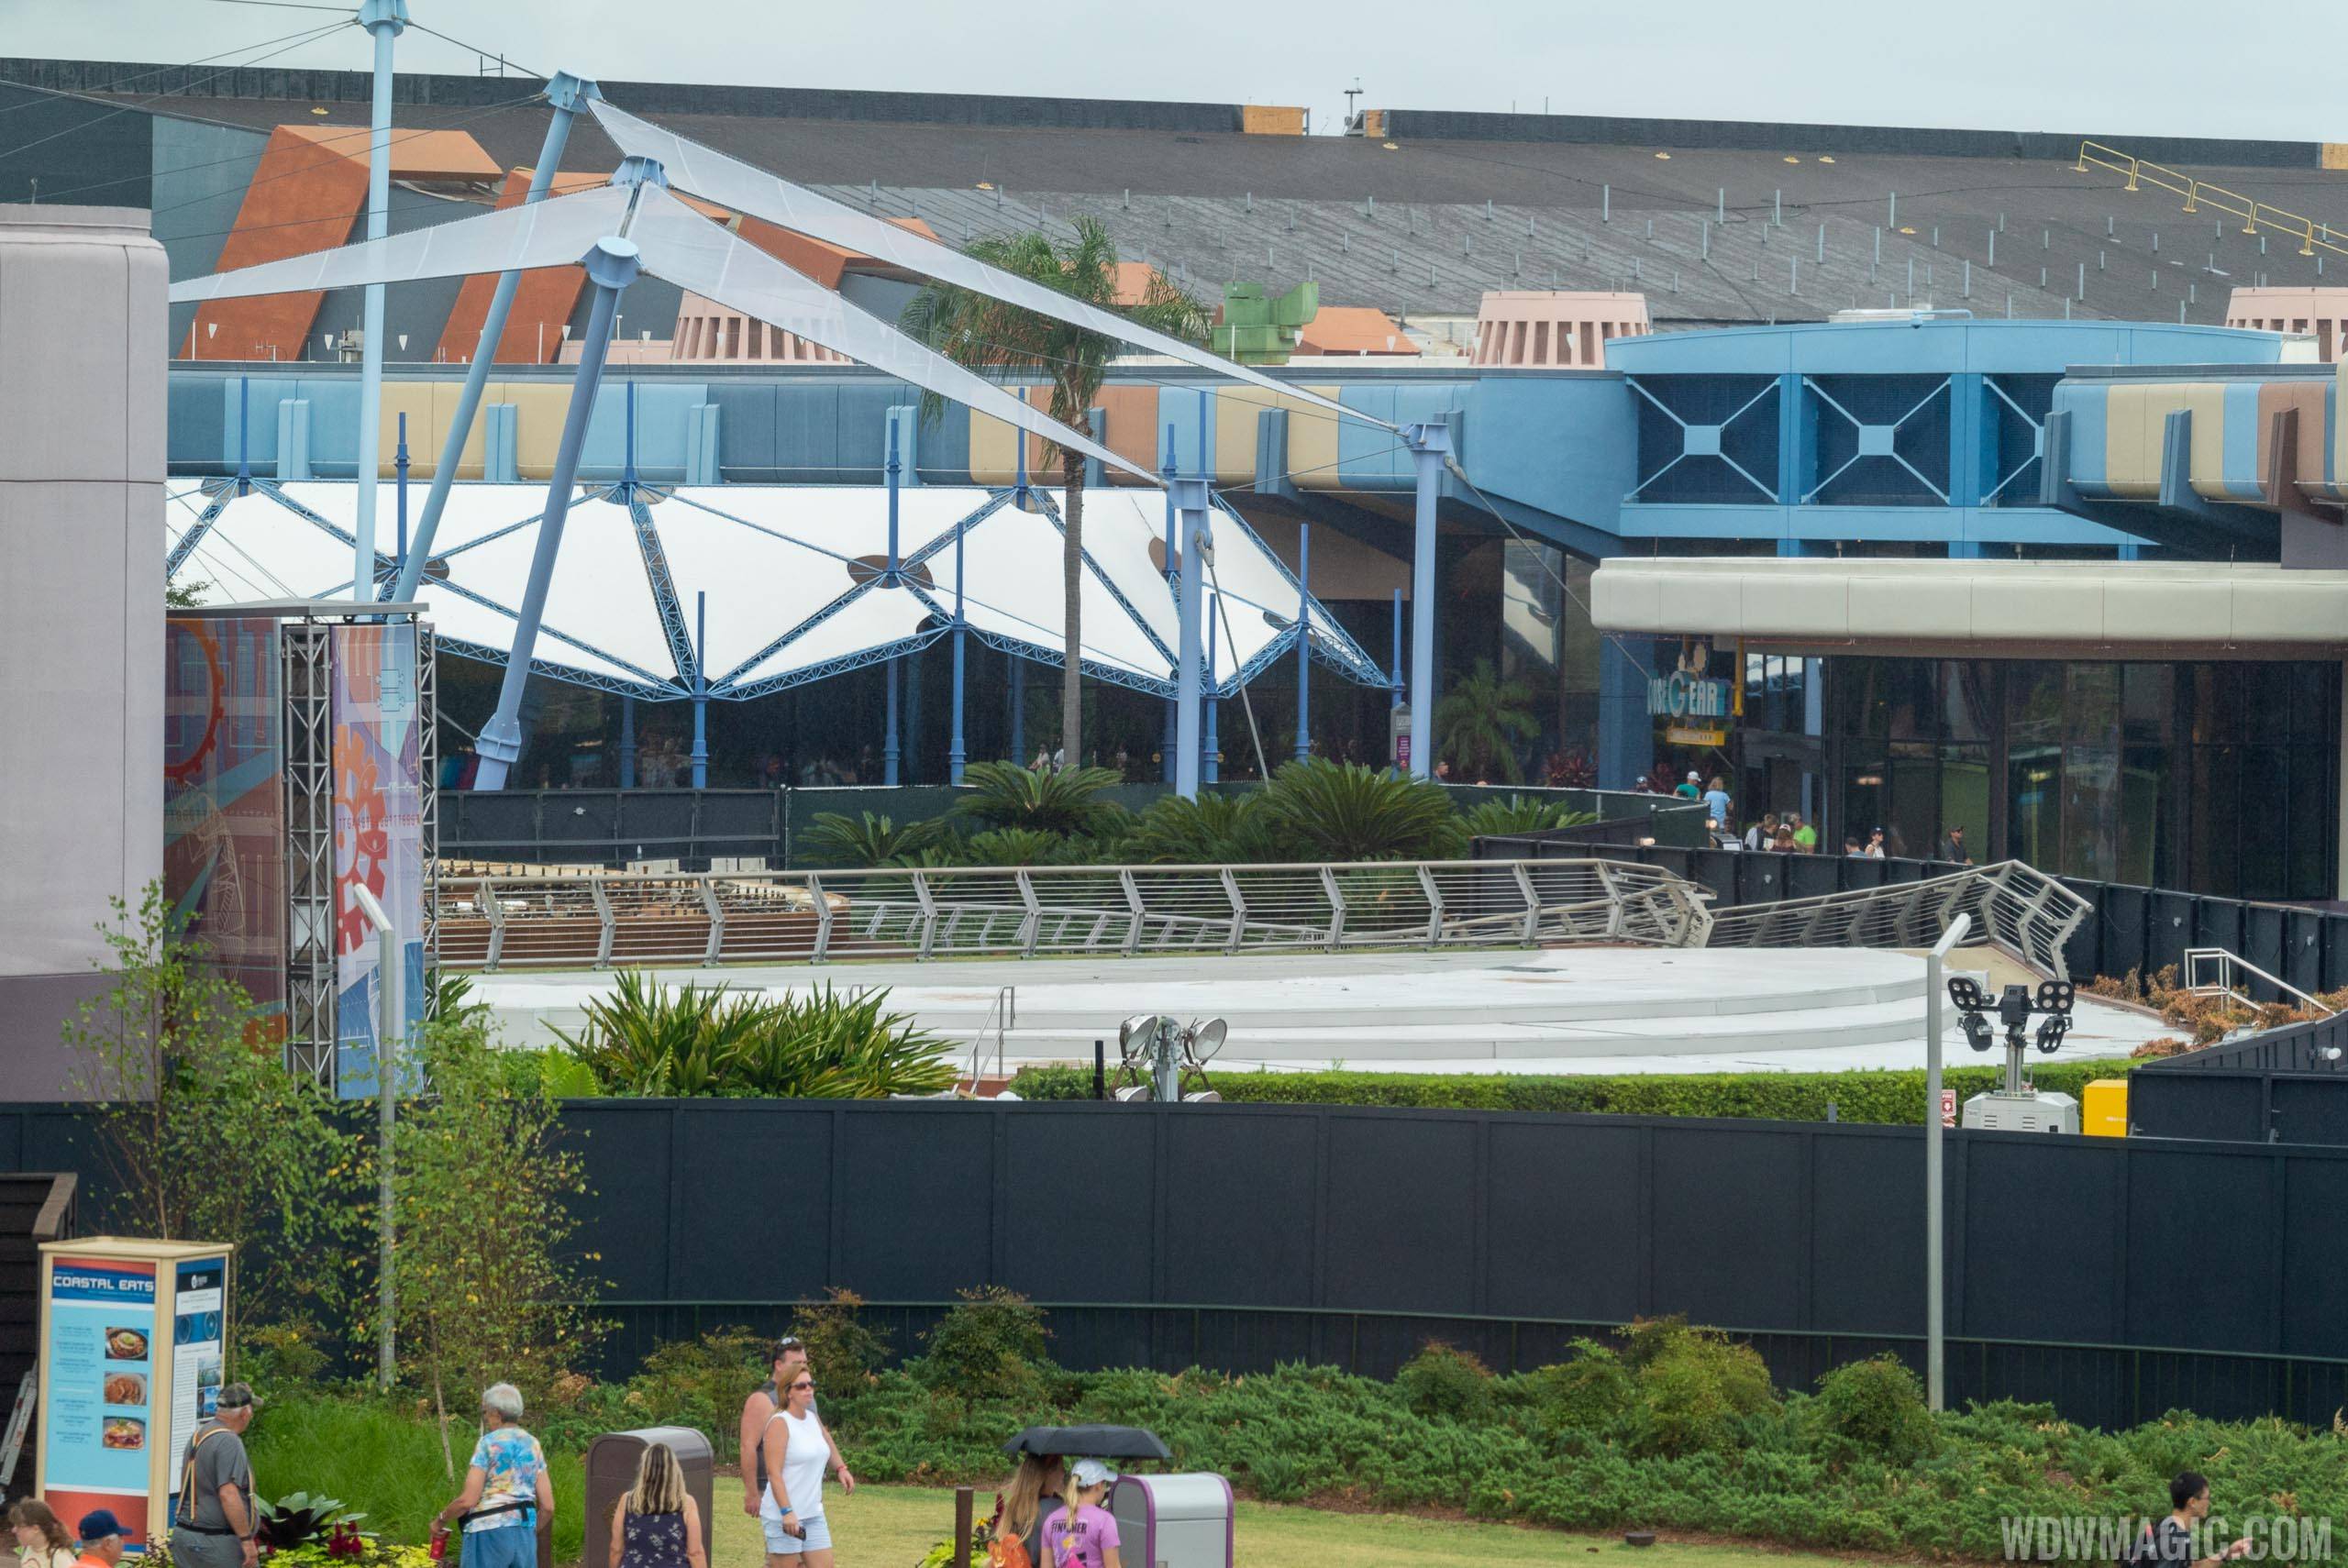 Epcot central area construction October 2019 - Looking toward Fountain of Nations